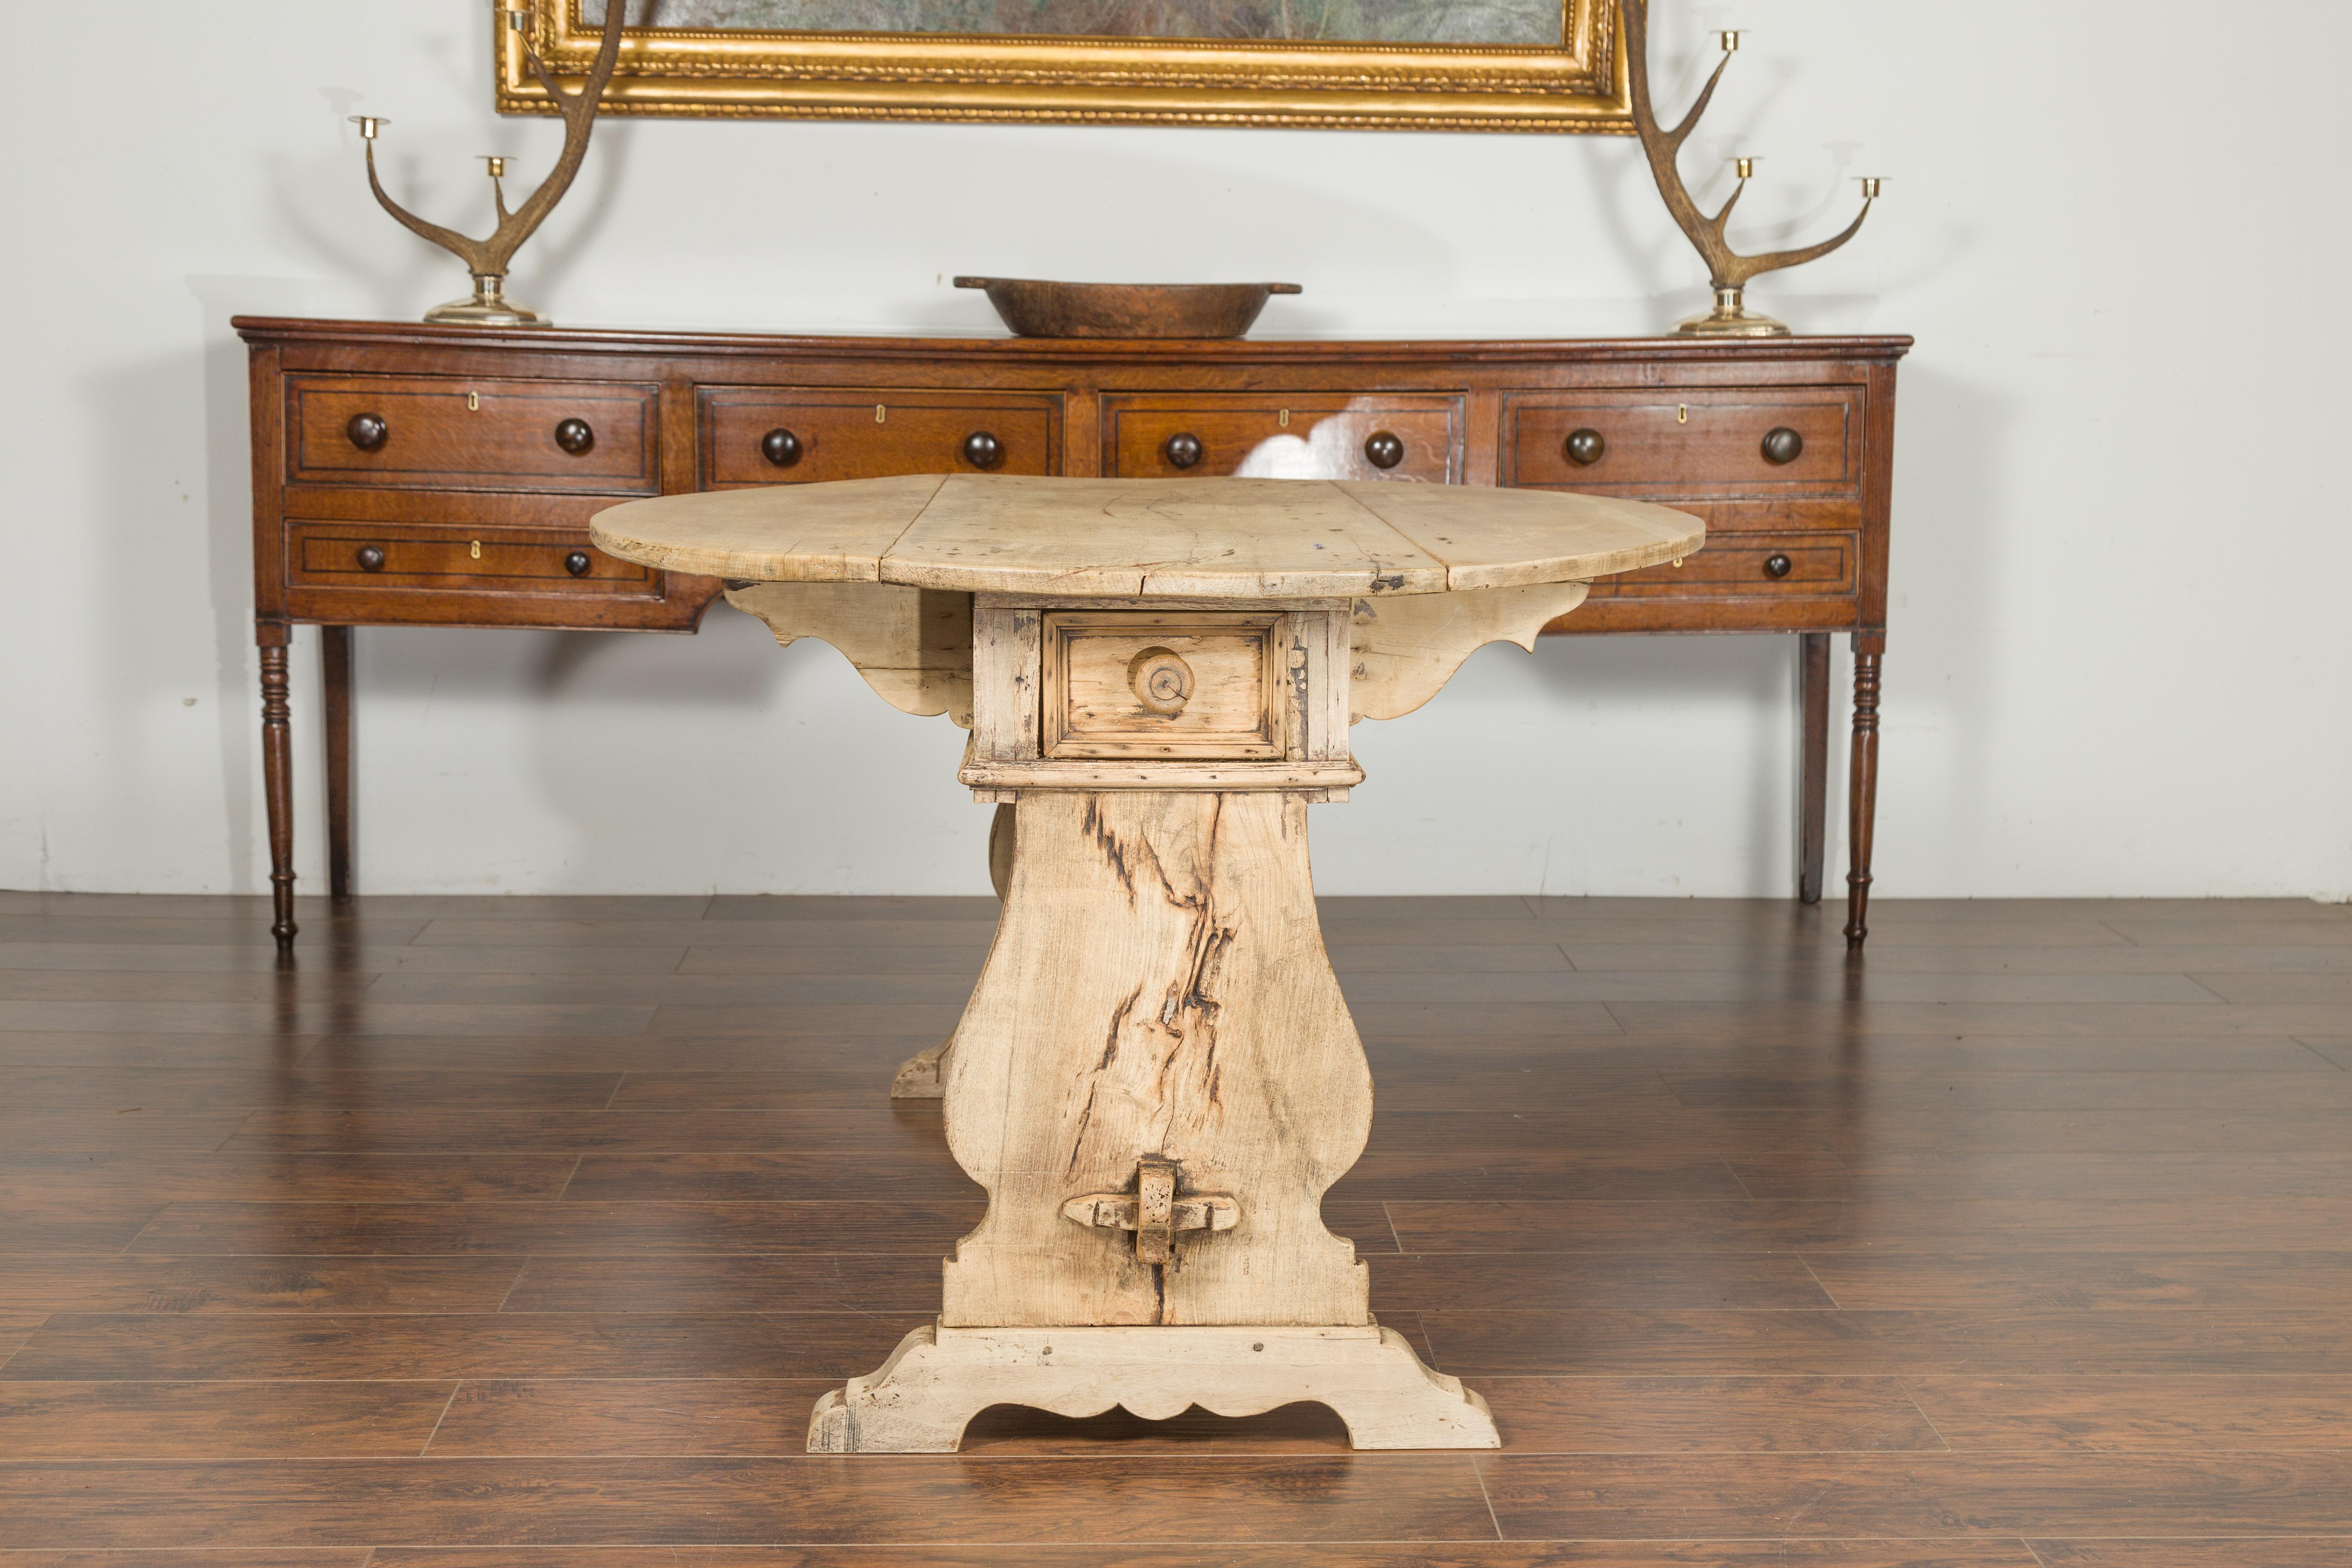 Oval Italian 1800s Bleached Walnut Drop-Leaf Trestle Table with Drawers For Sale 4